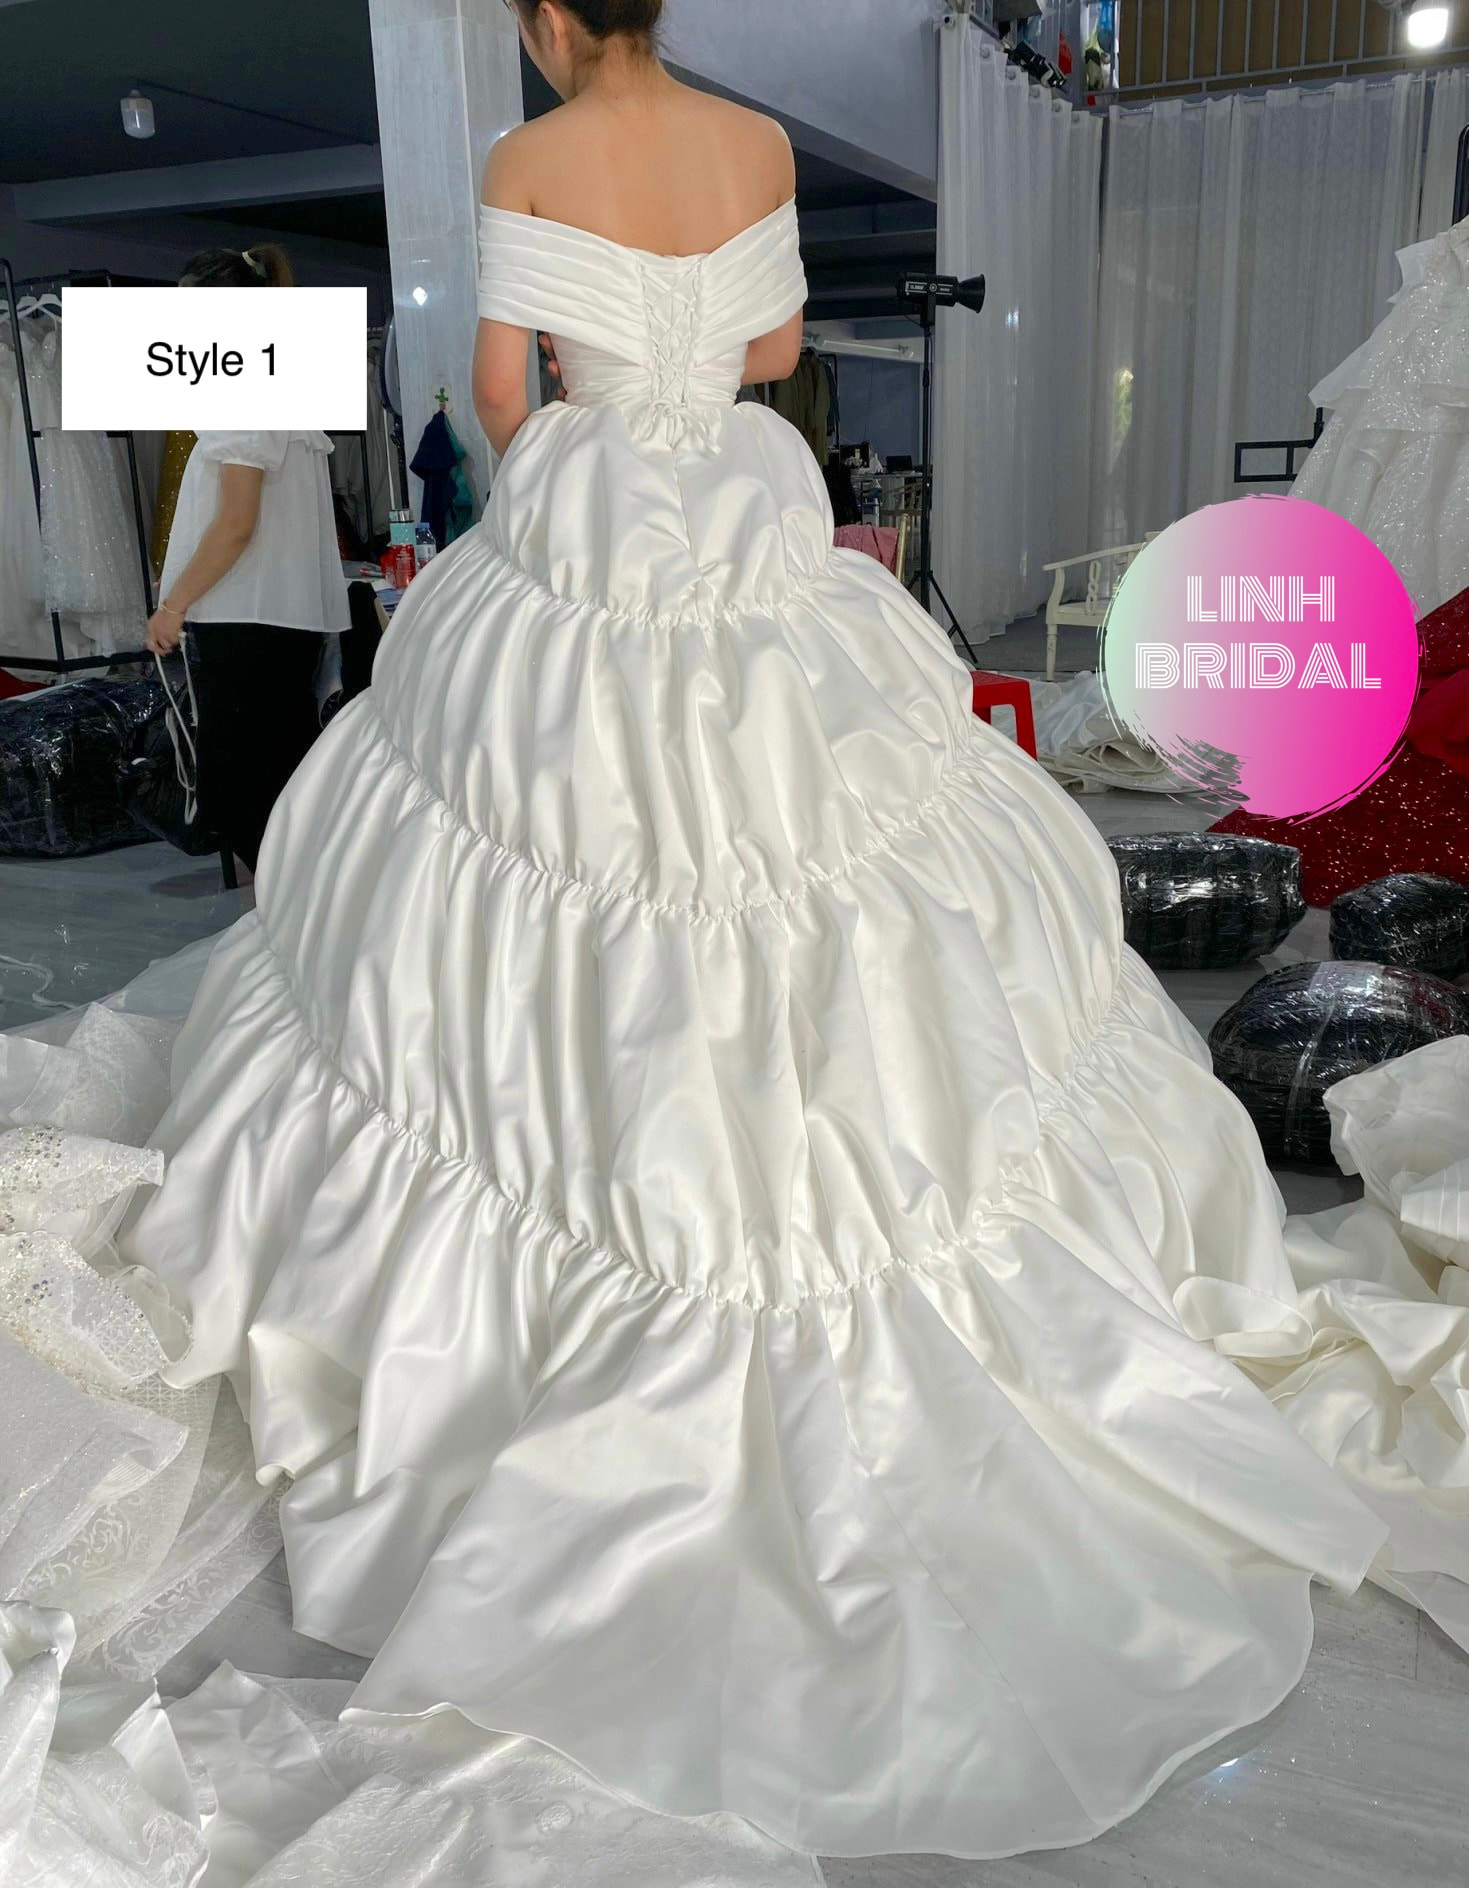 Off the shoulder elegant white satin ball gown wedding dress with train ...